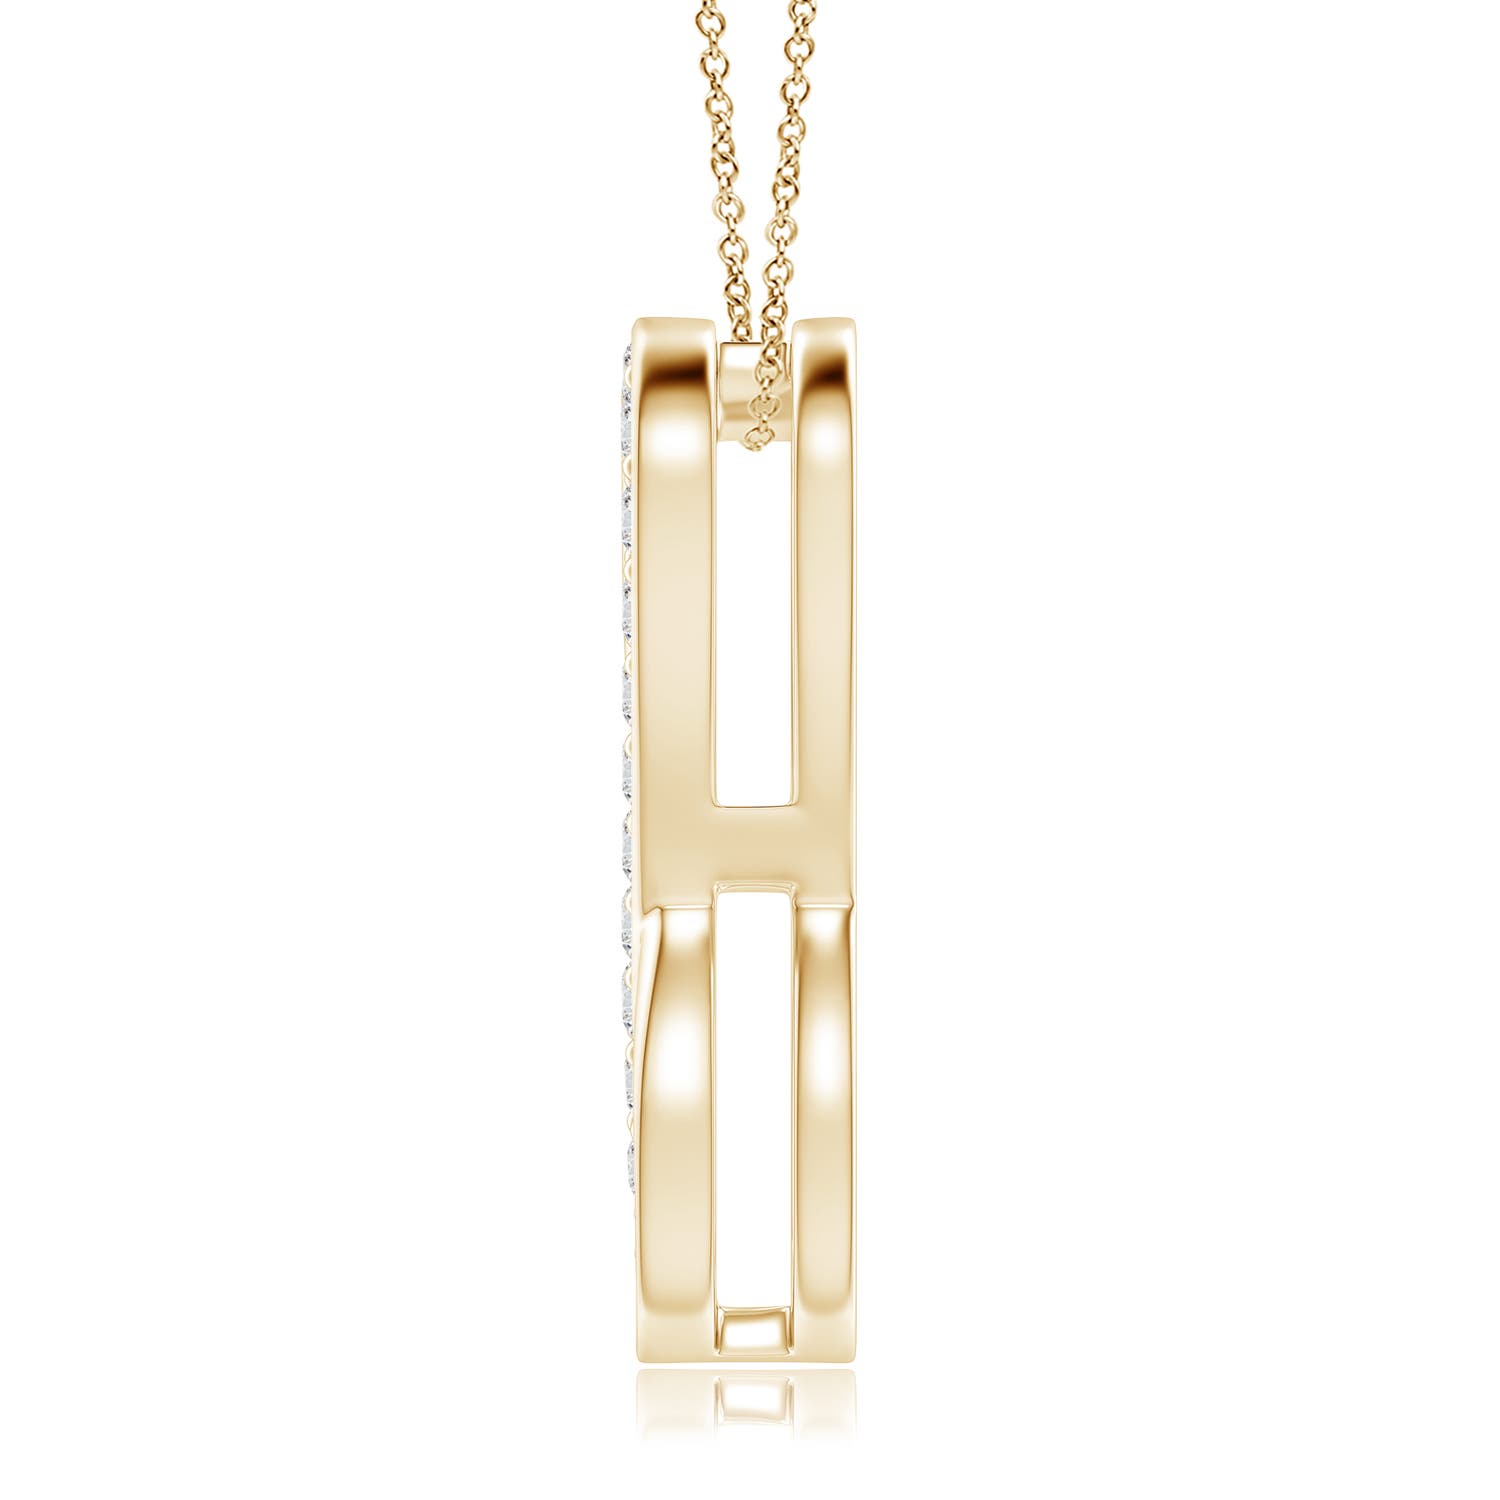 H, SI2 / 0.21 CT / 14 KT Yellow Gold